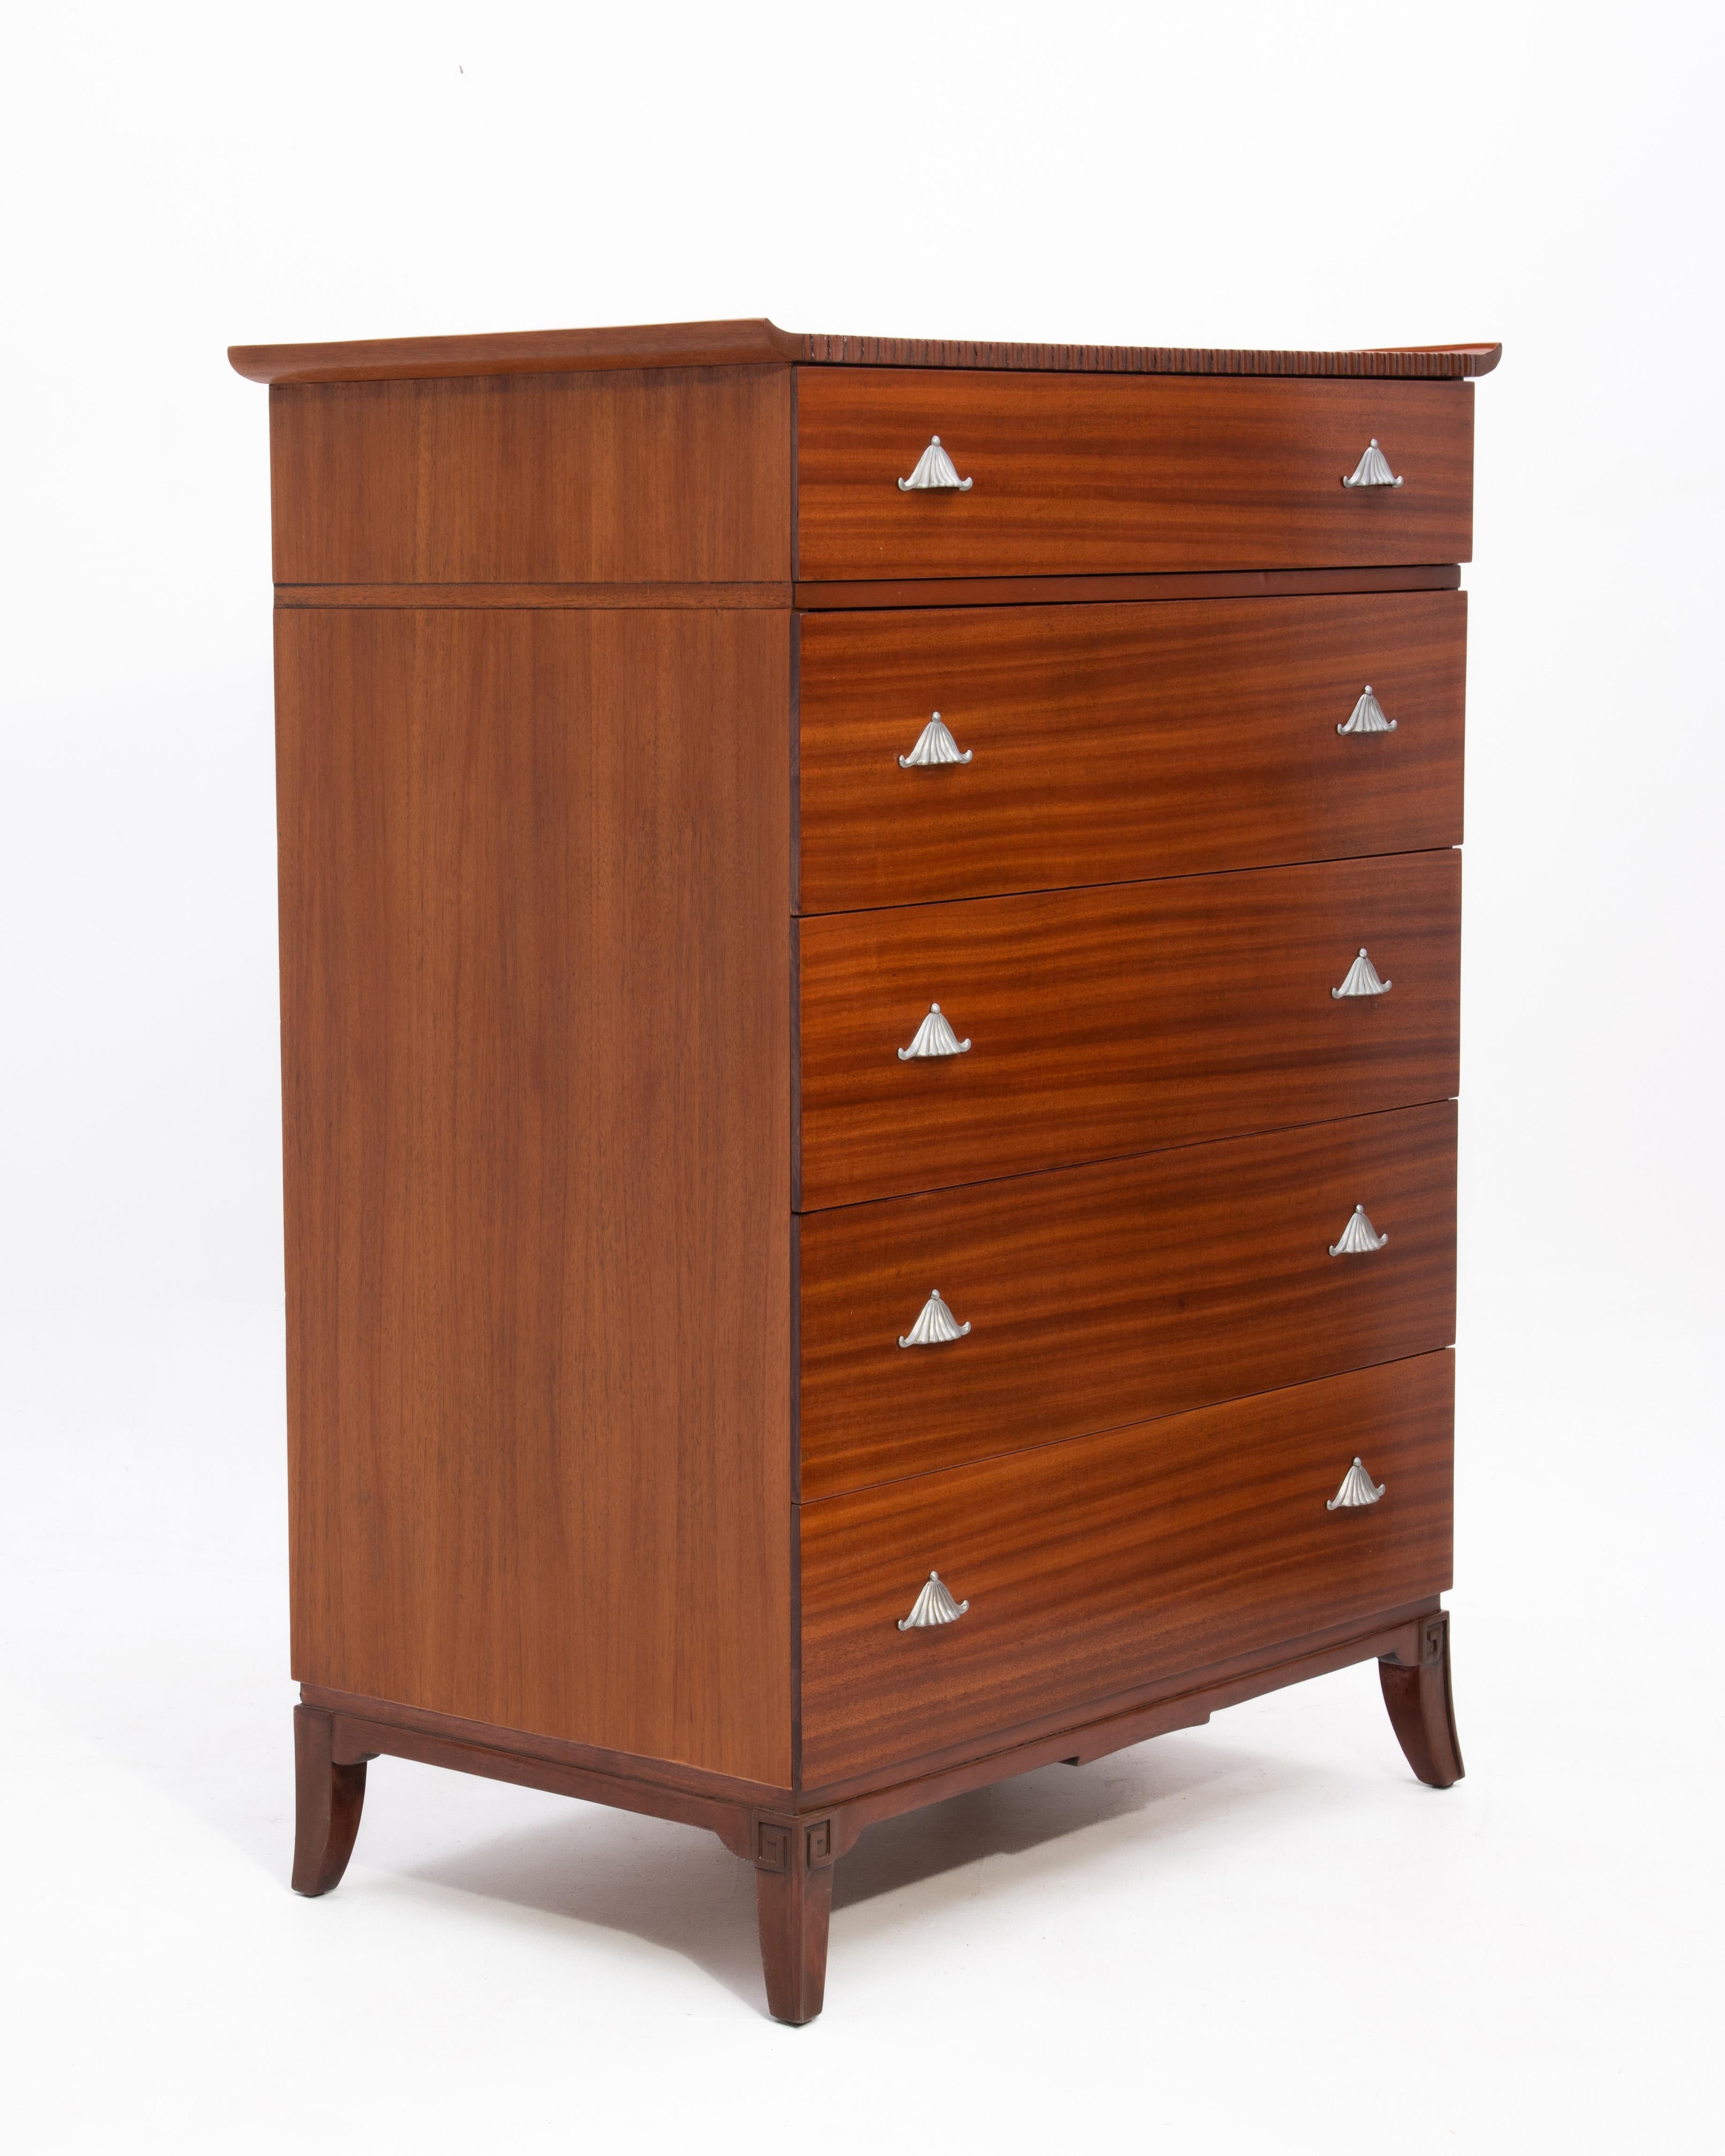 An absolutely stunning RWAY Mid Century dresser in the style of James Mont. Extremely well made with excellent wood selection, great proportion and graduated drawers.